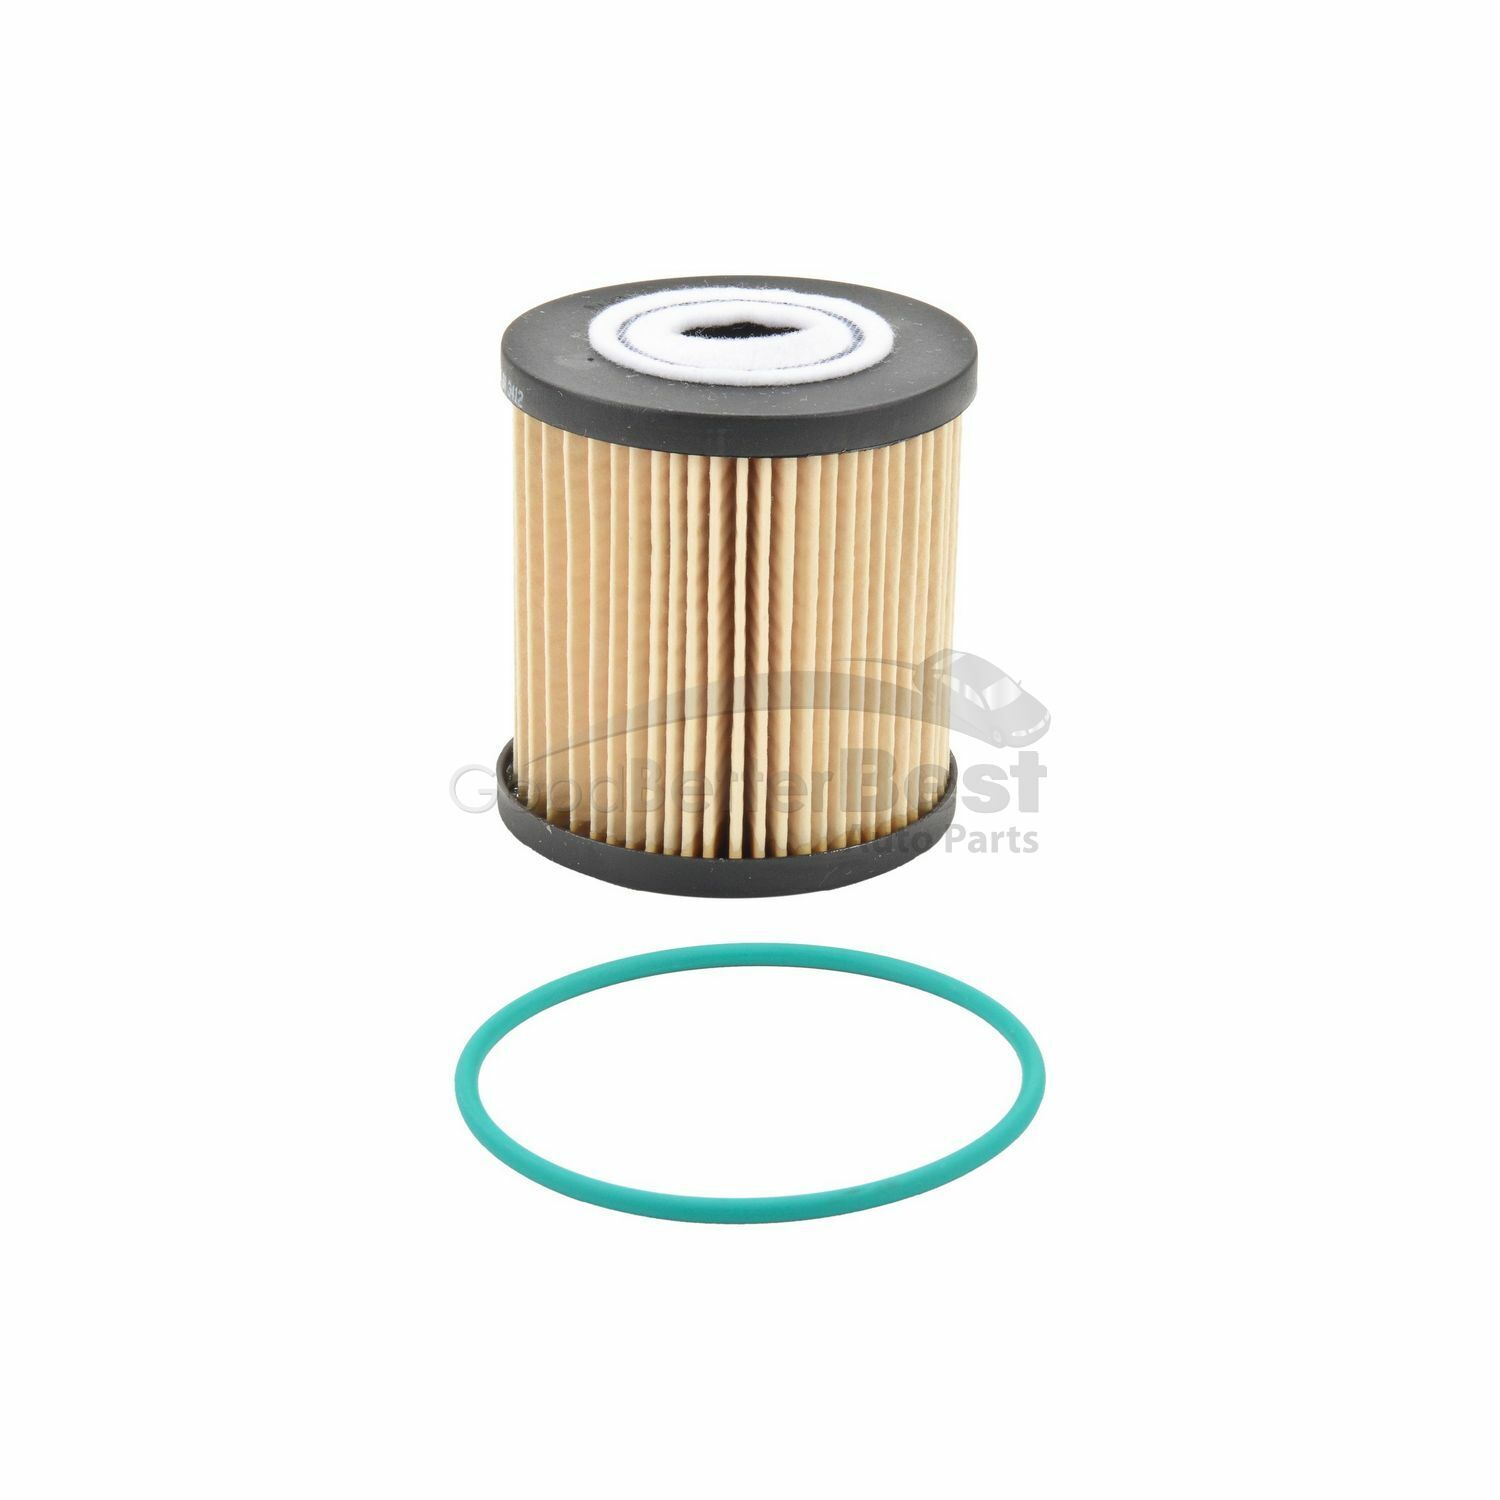 One New Bosch Engine Oil Filter 3412 for Volvo